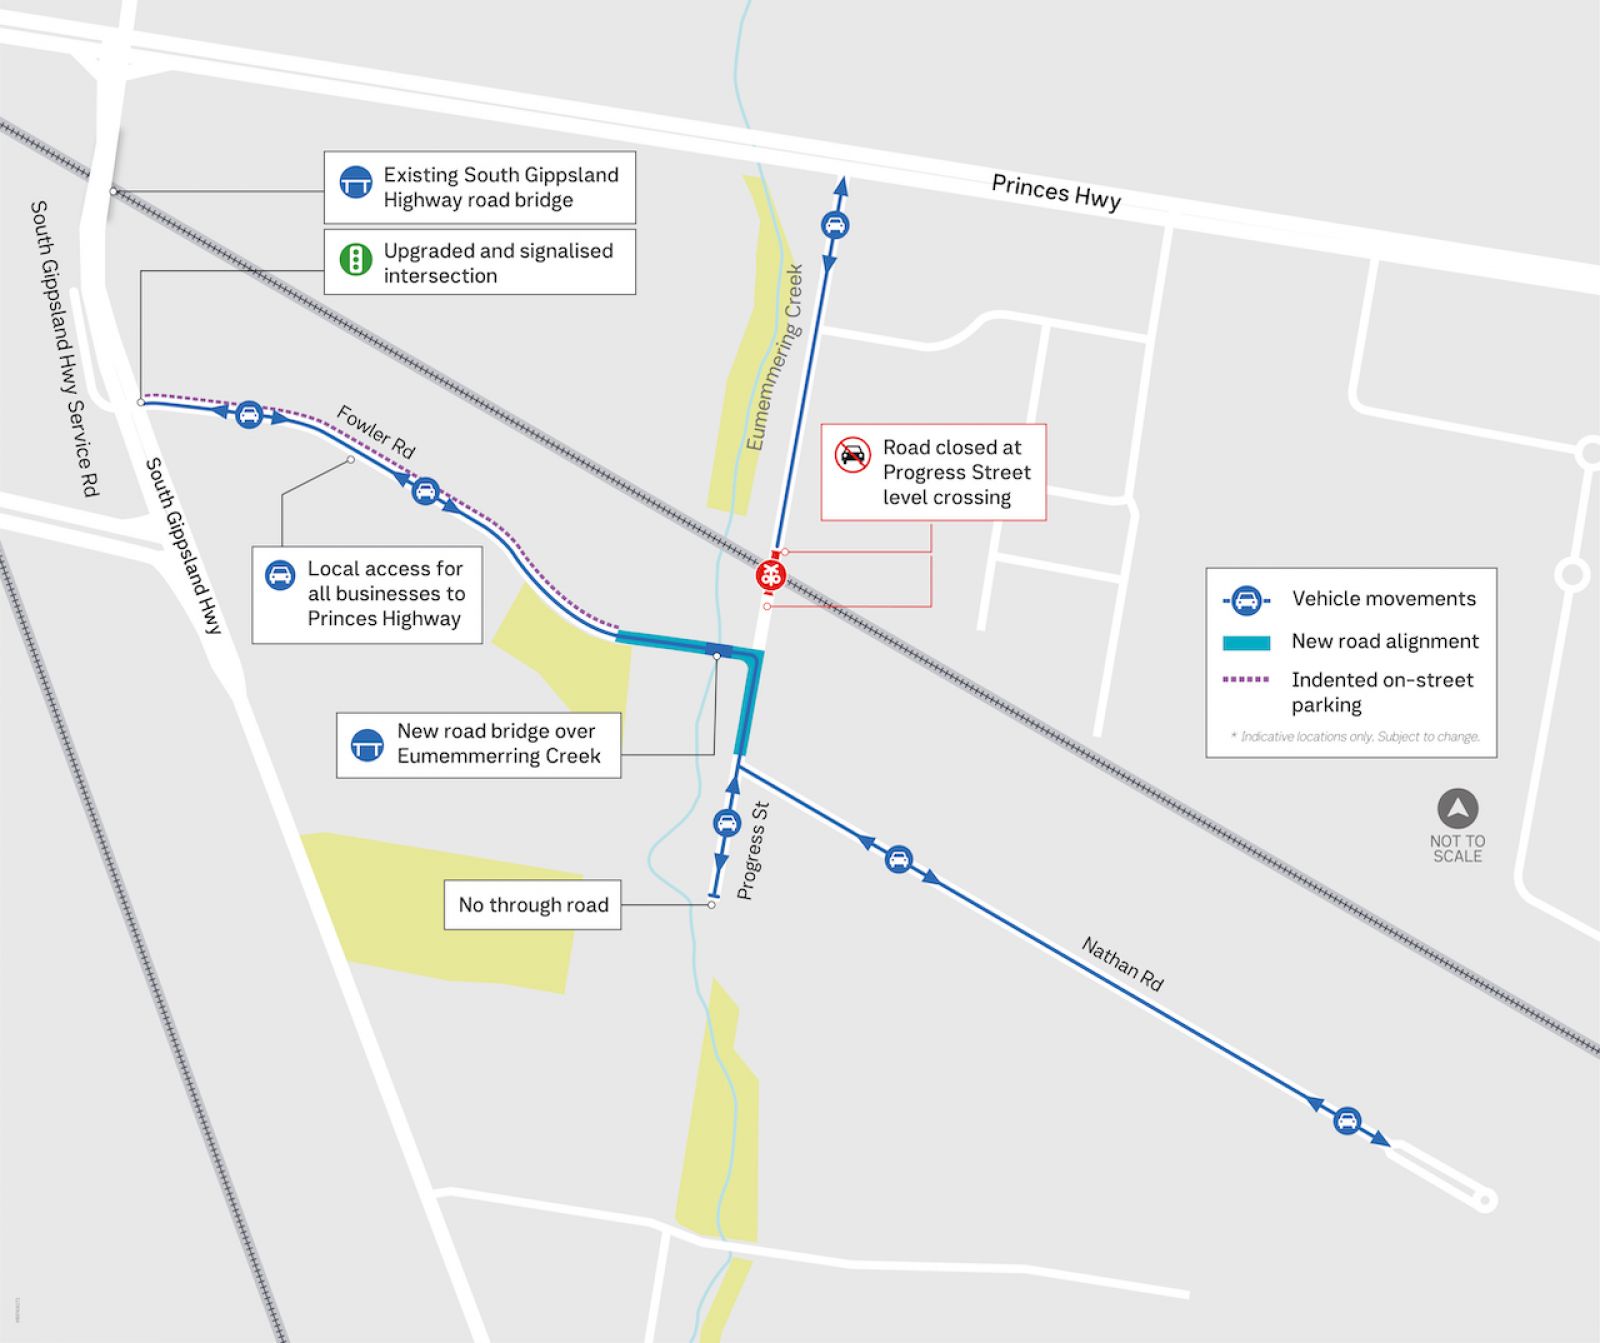 Map of changes at Progress Street, including new road alignment to connect to Fowler Road.